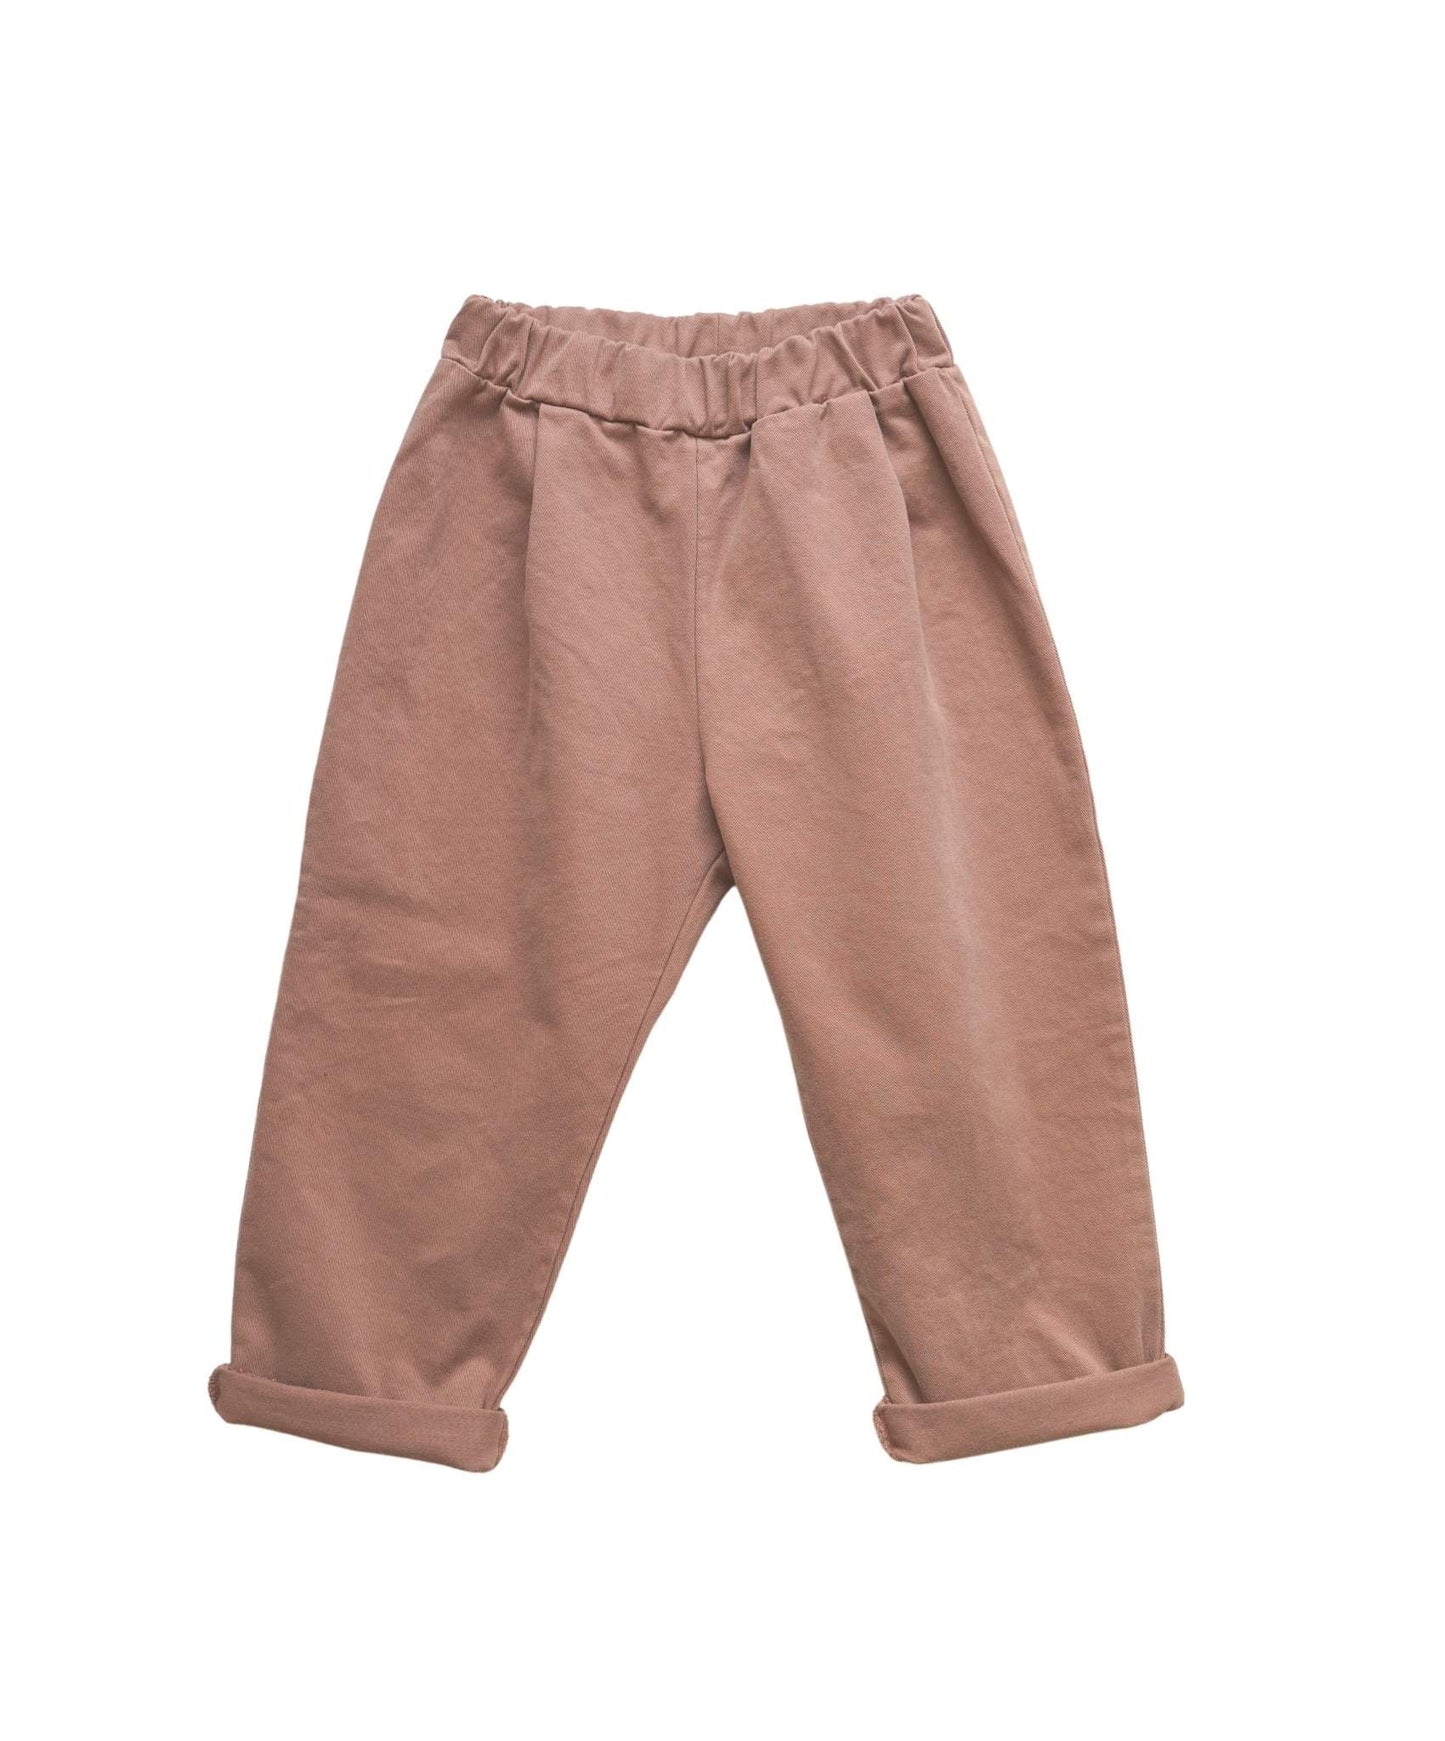 Stocksale: The Canvas pants - rose wood